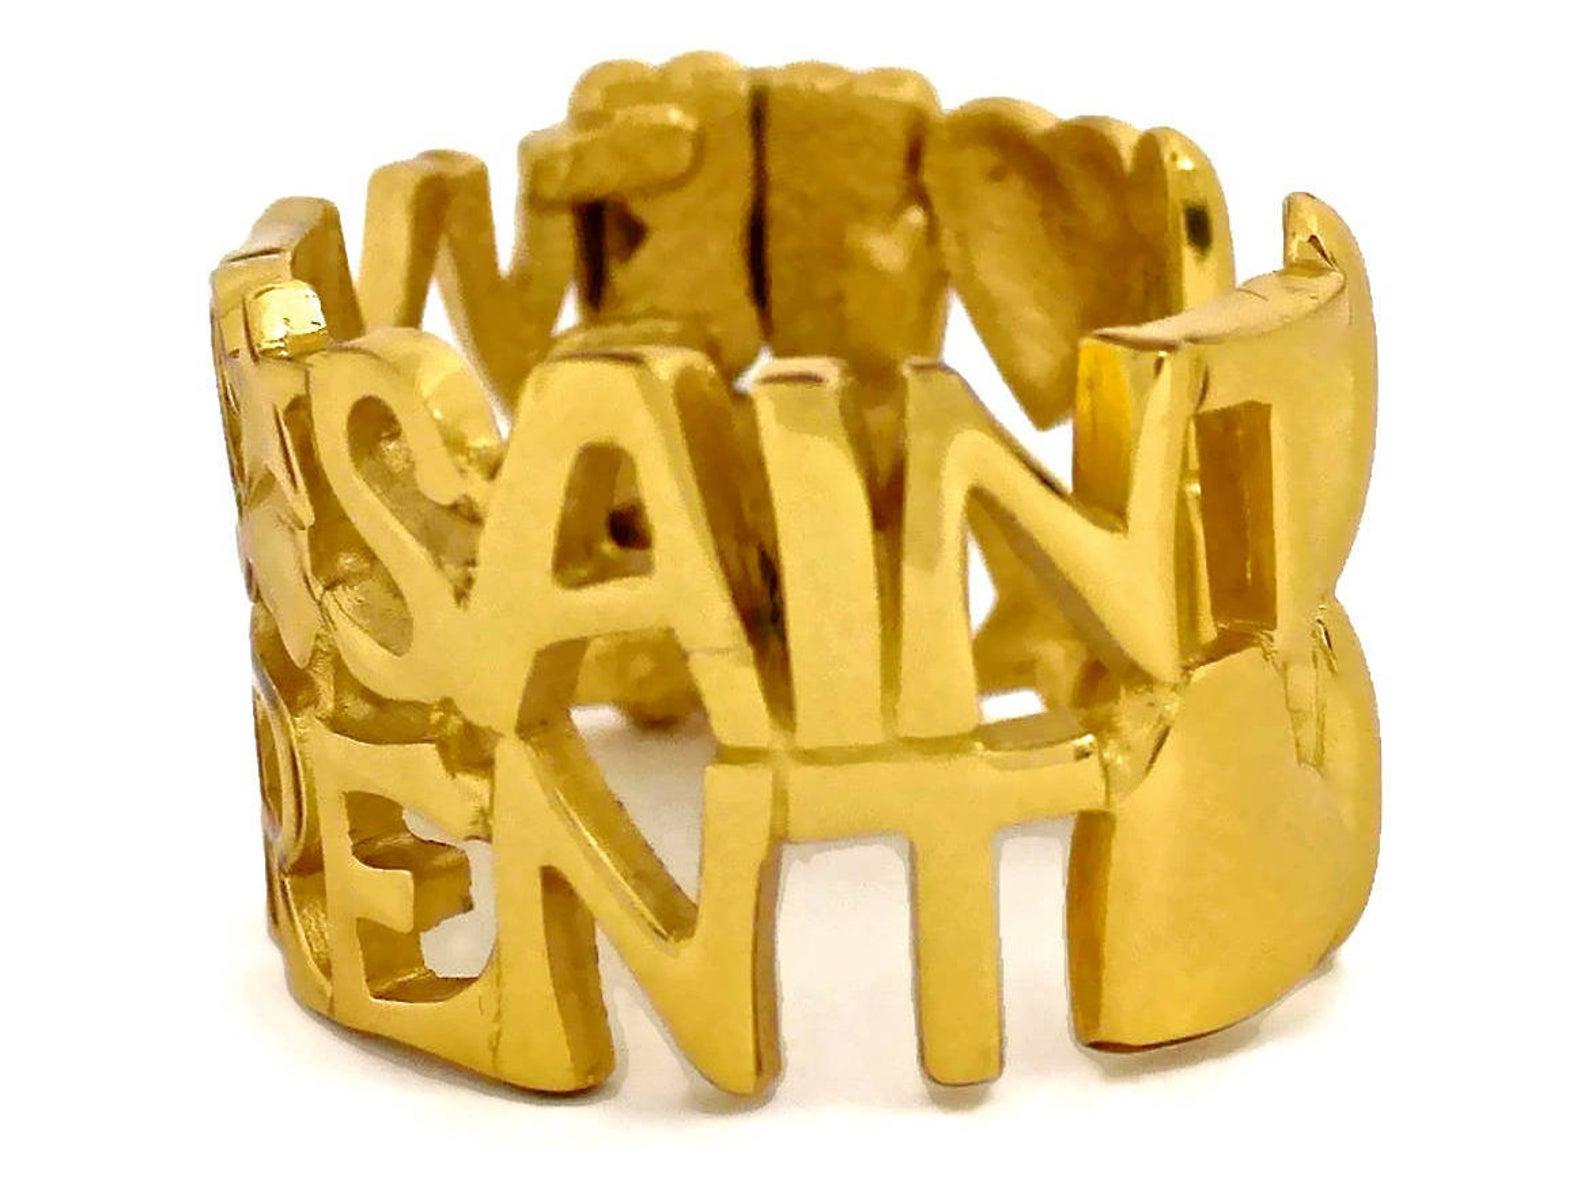 ysl letters